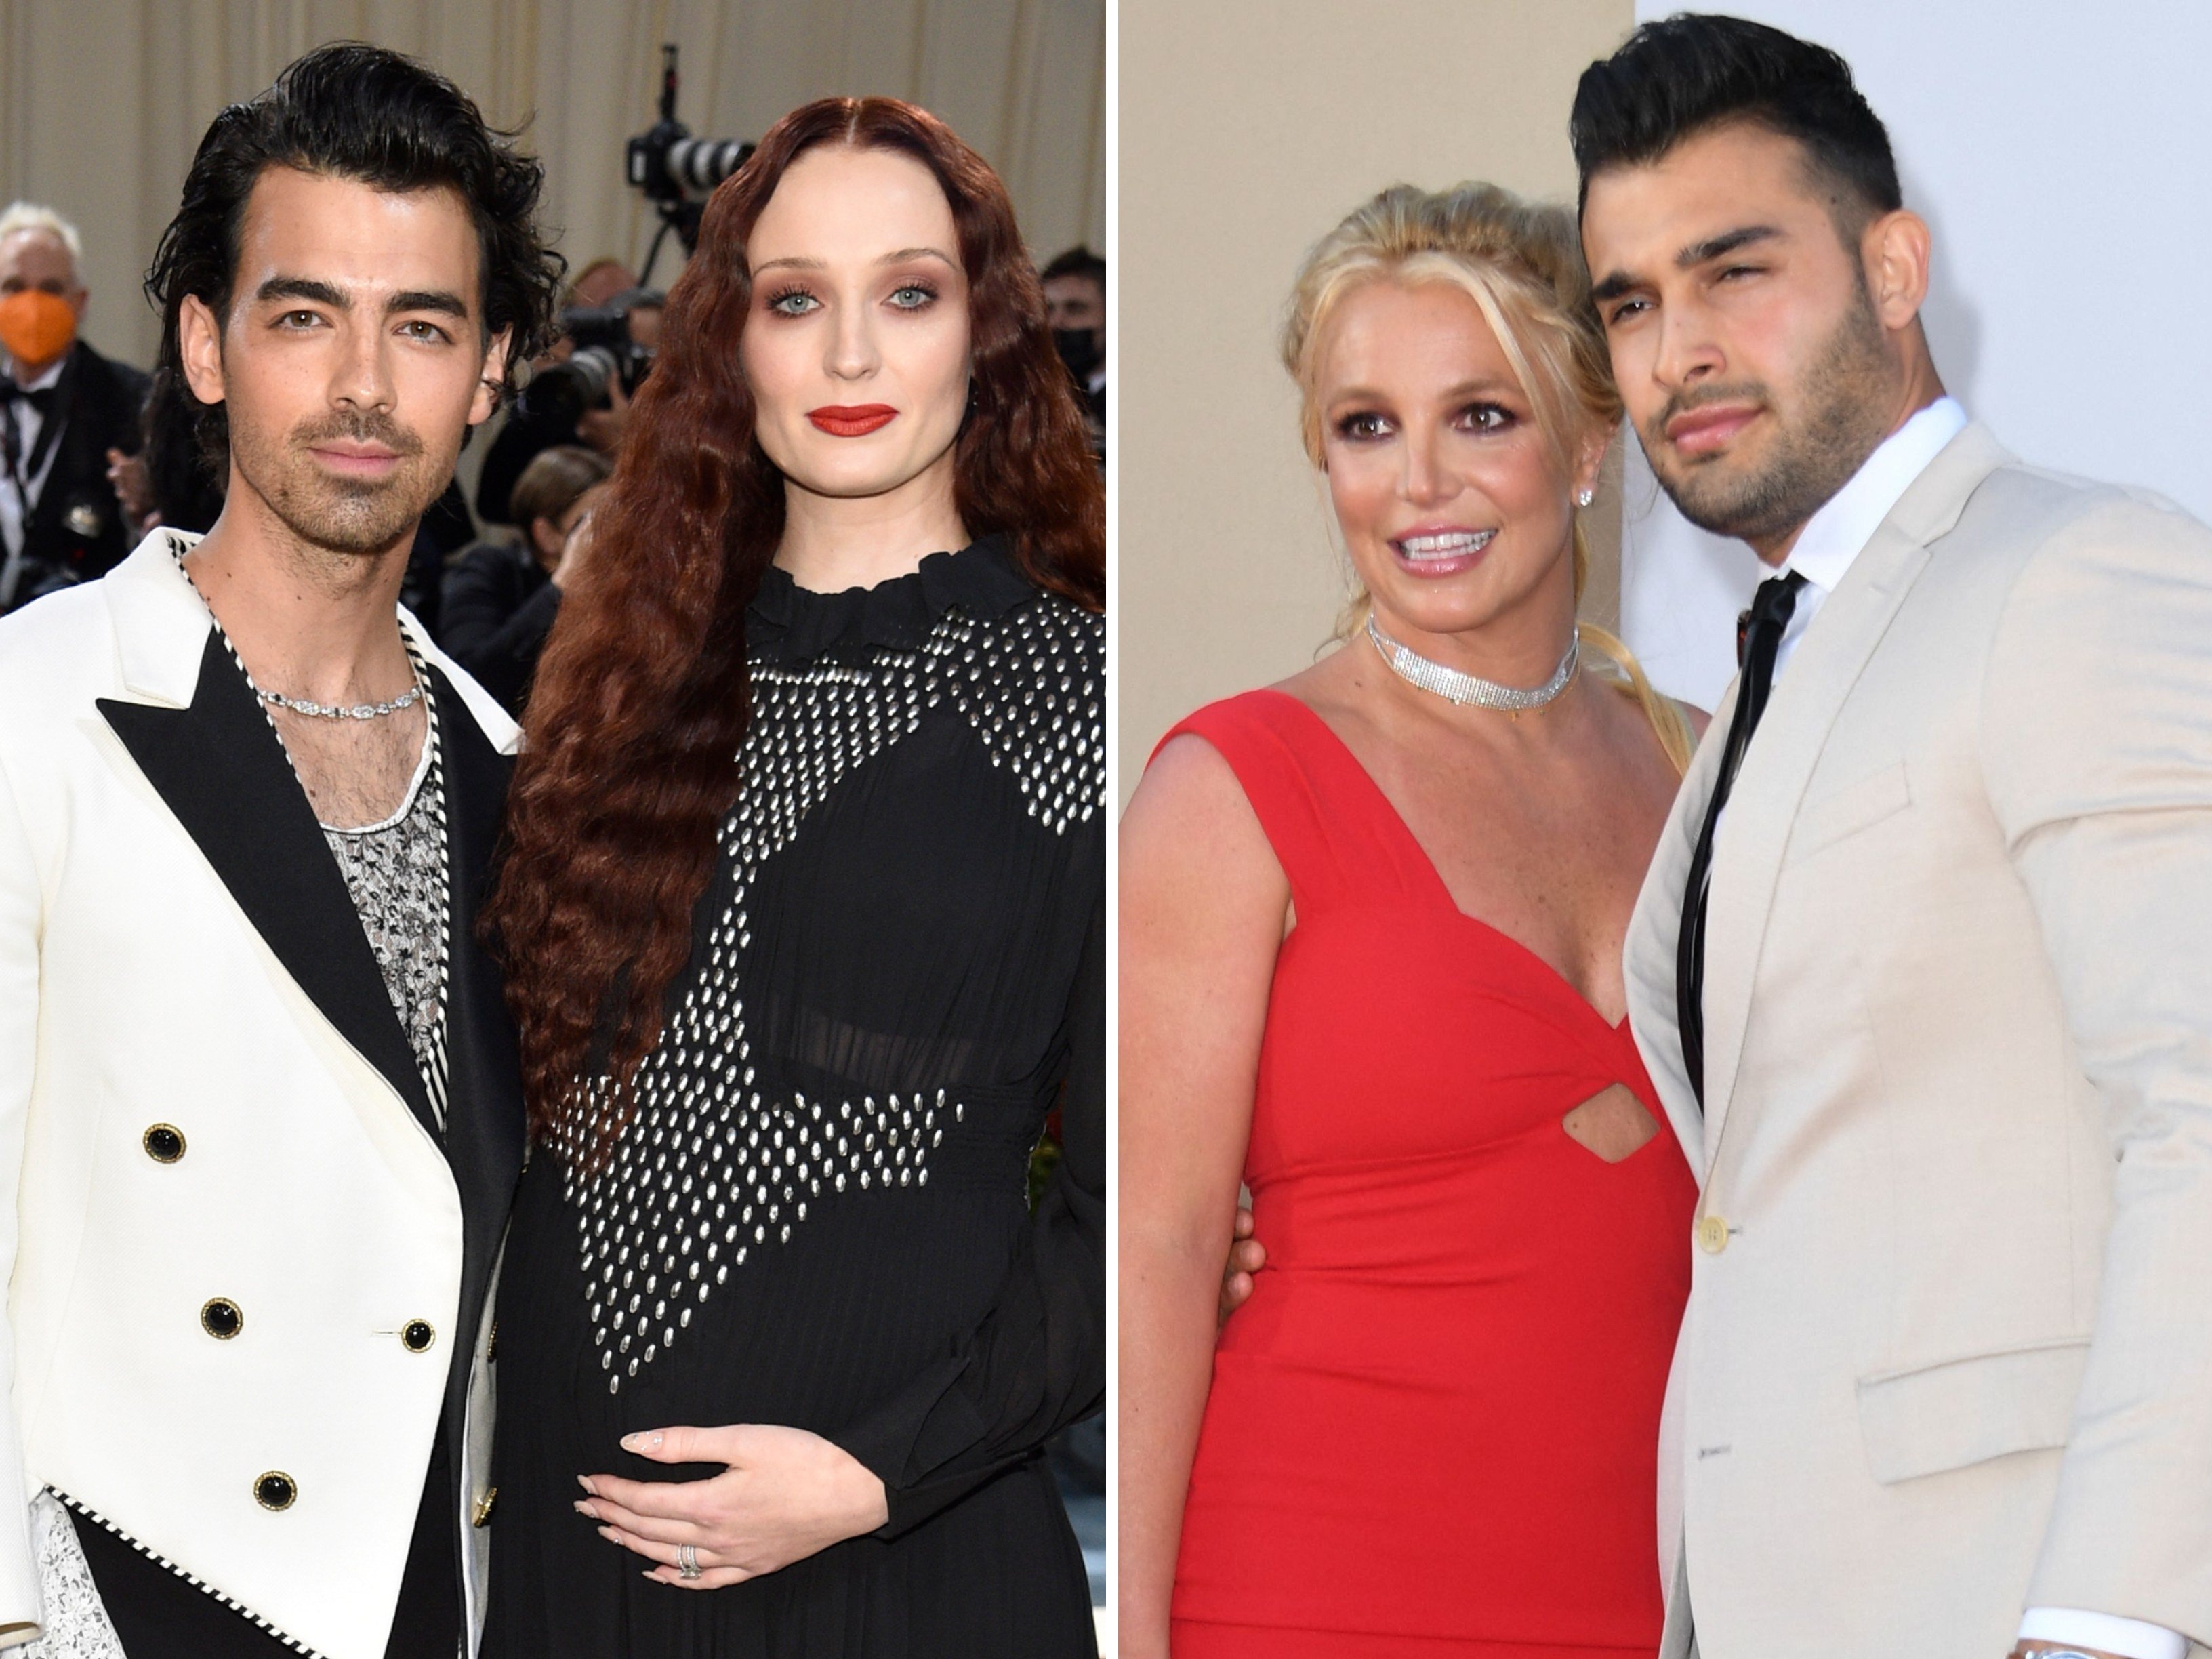 Joe Jonas and Sophie Turner, and Britney Spears and Sam Asghari are two of the many celebrity couples going through divorces this year. Photos: AFP, AP